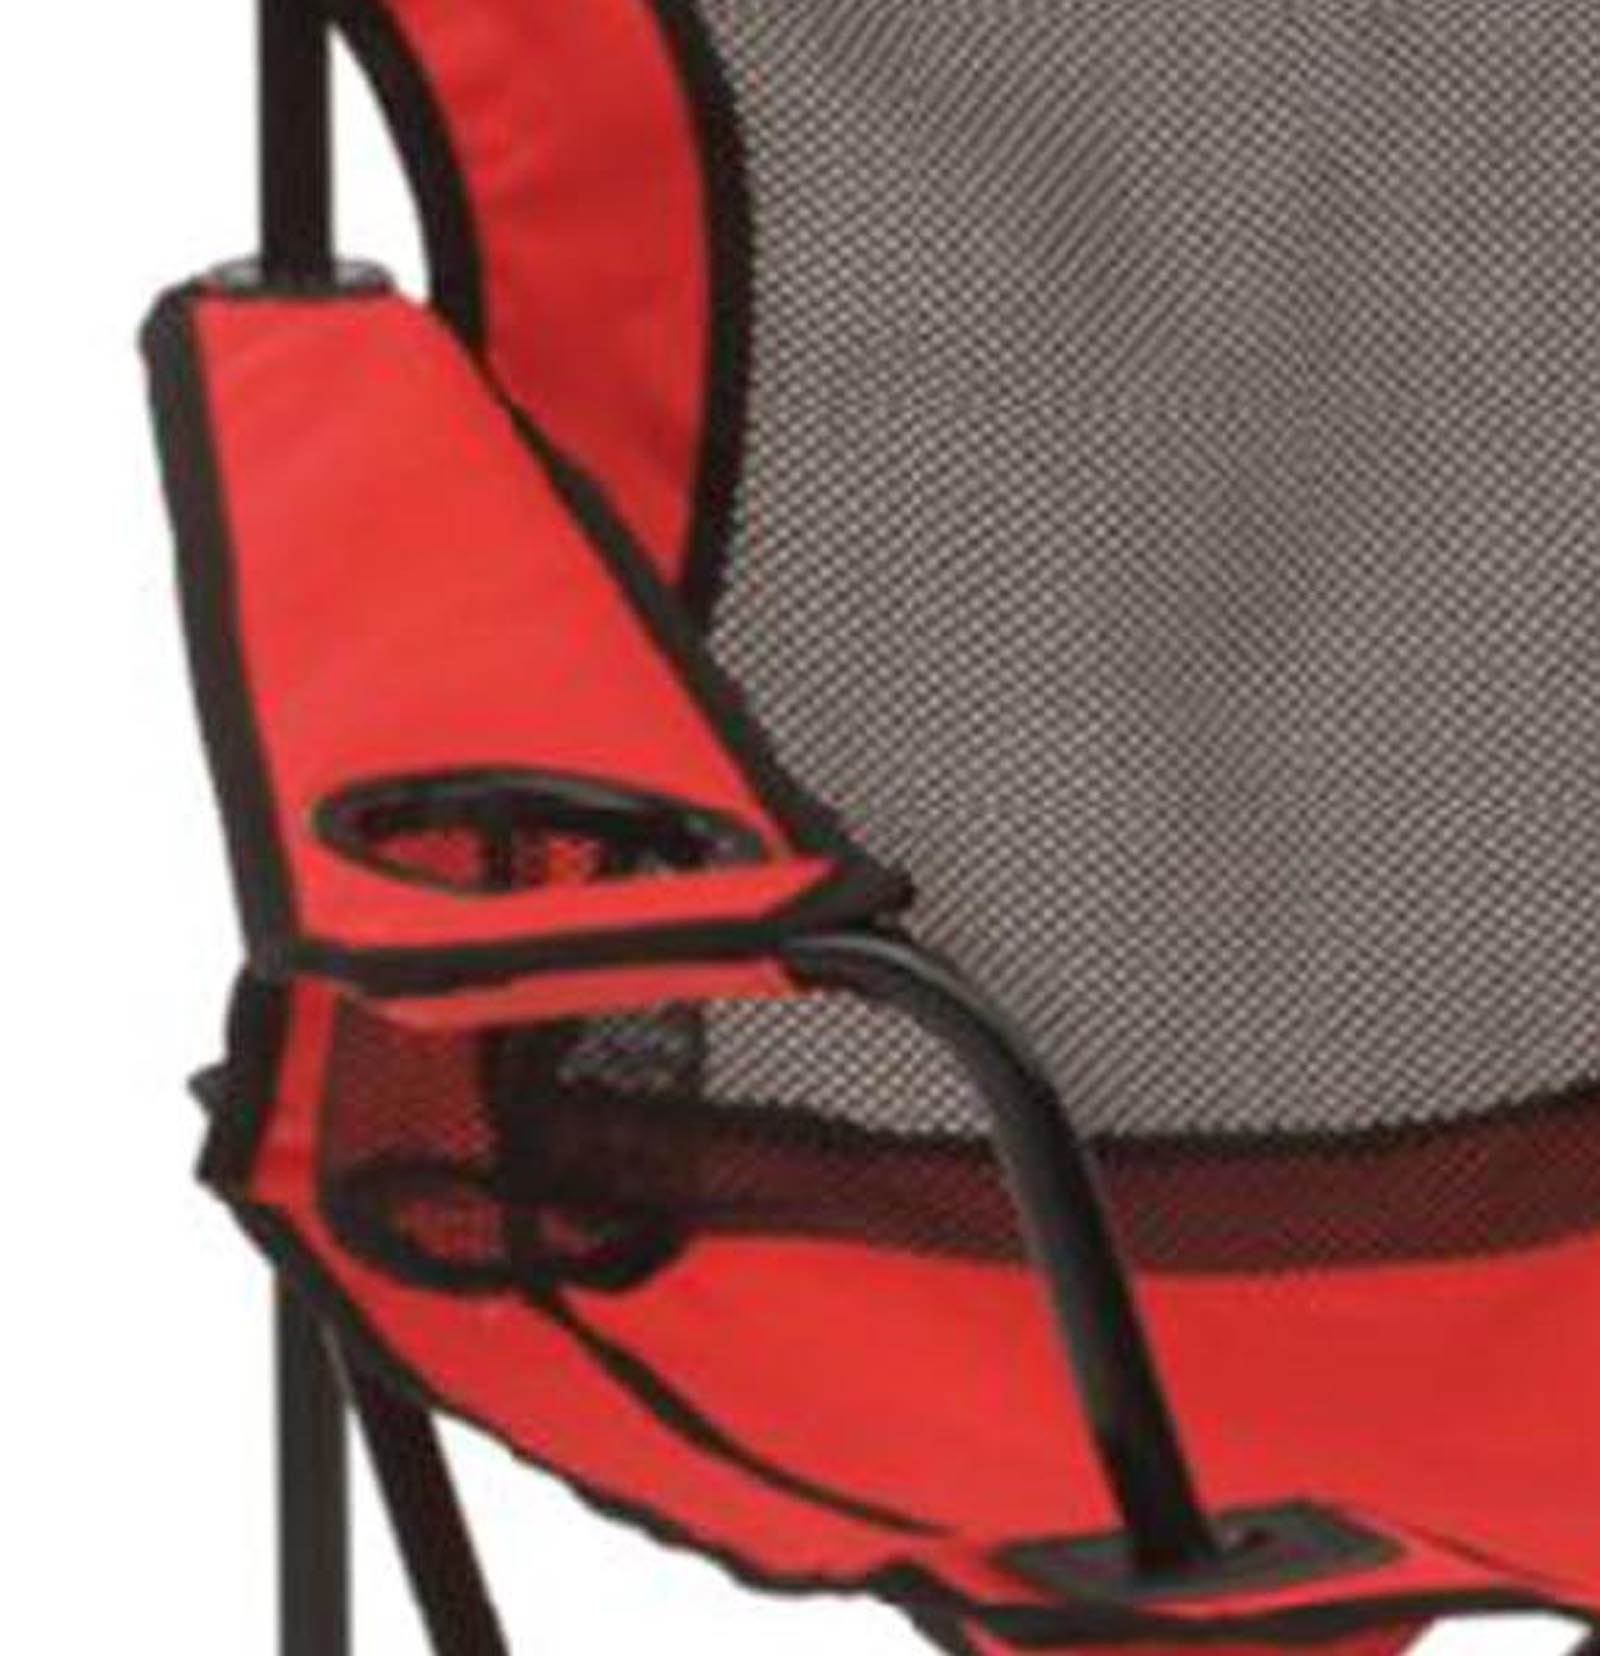 Coleman Broadband Mesh Quad Adult Camping Chair, Red - image 3 of 5